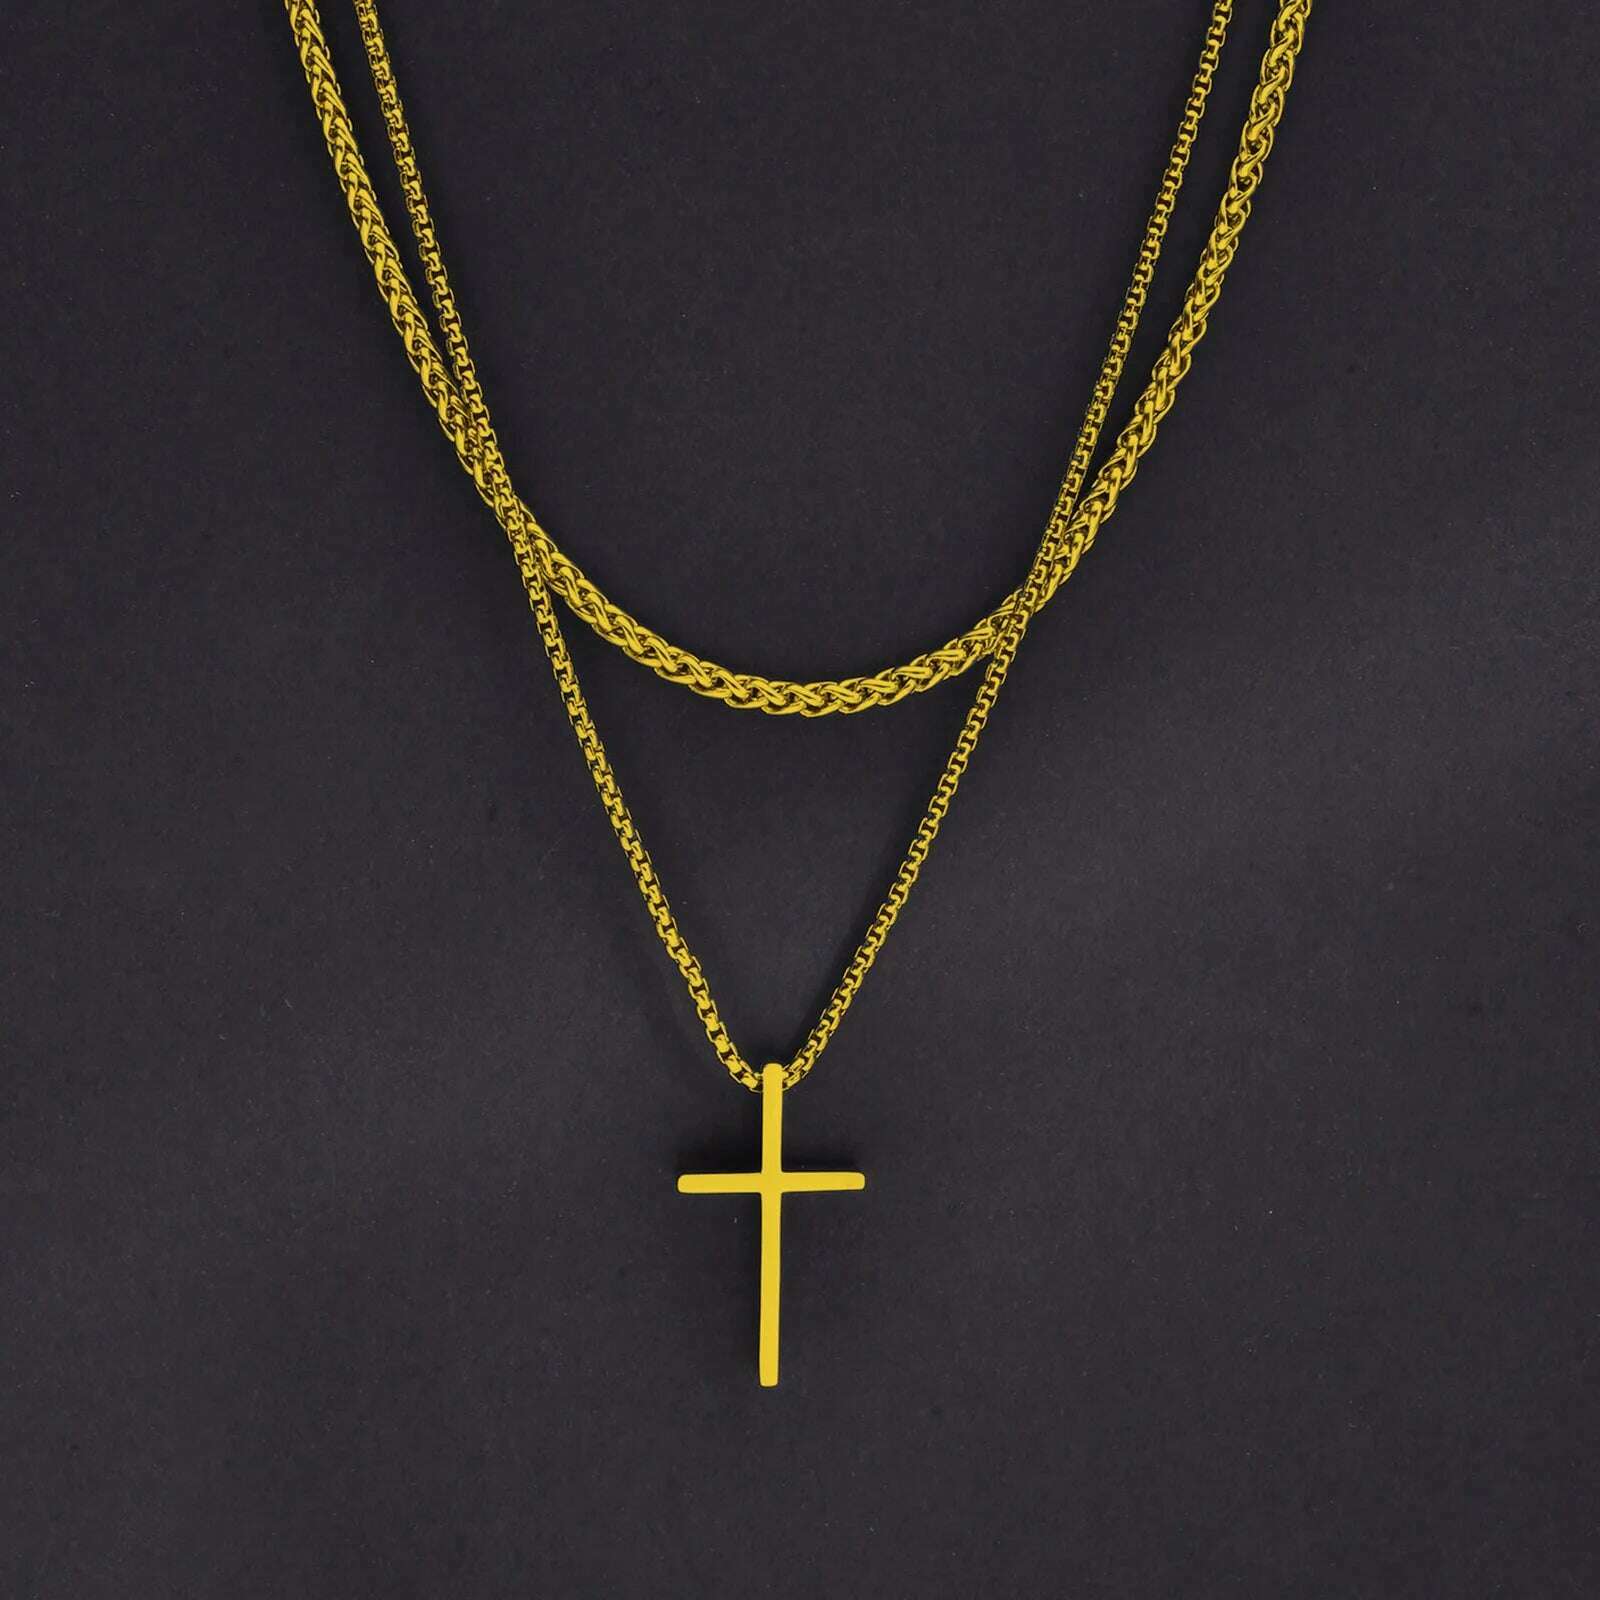 KIMLUD, Vnox Mens Cross Necklaces, Stainless Steel Layered Plain Cross Pendant, Rope Box Chain Necklace, Simple Prayer Jesus Collar, NC-1035G NC-104-50G, KIMLUD Women's Clothes